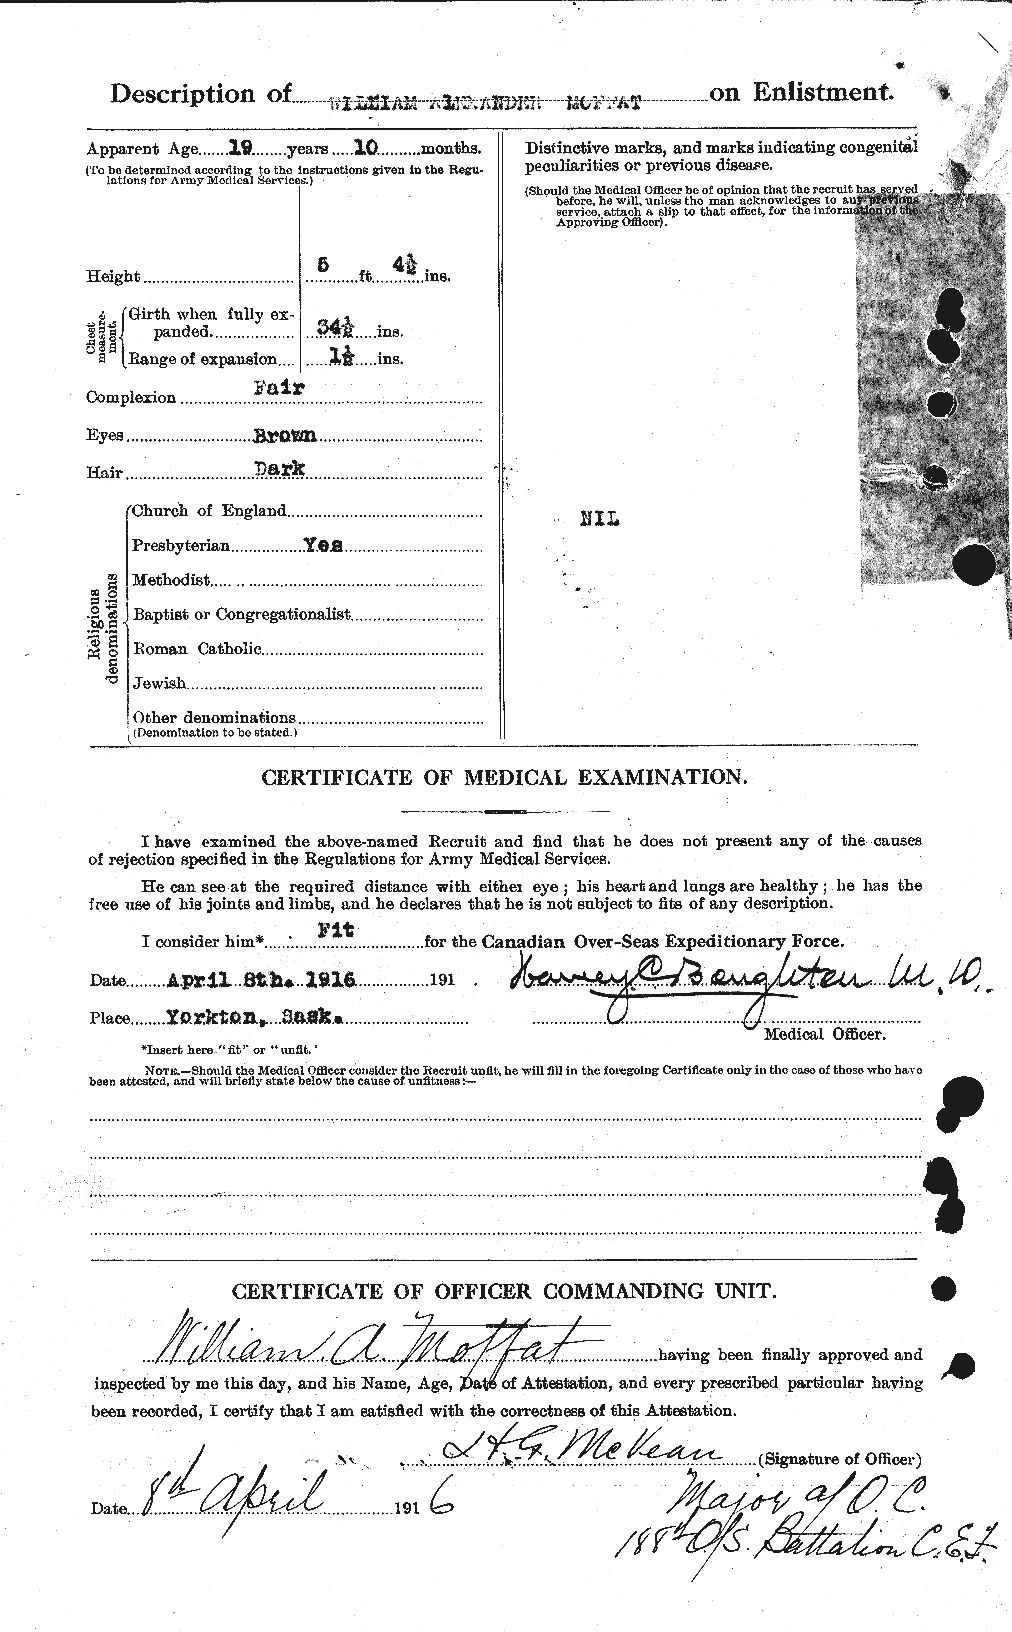 Personnel Records of the First World War - CEF 499090b